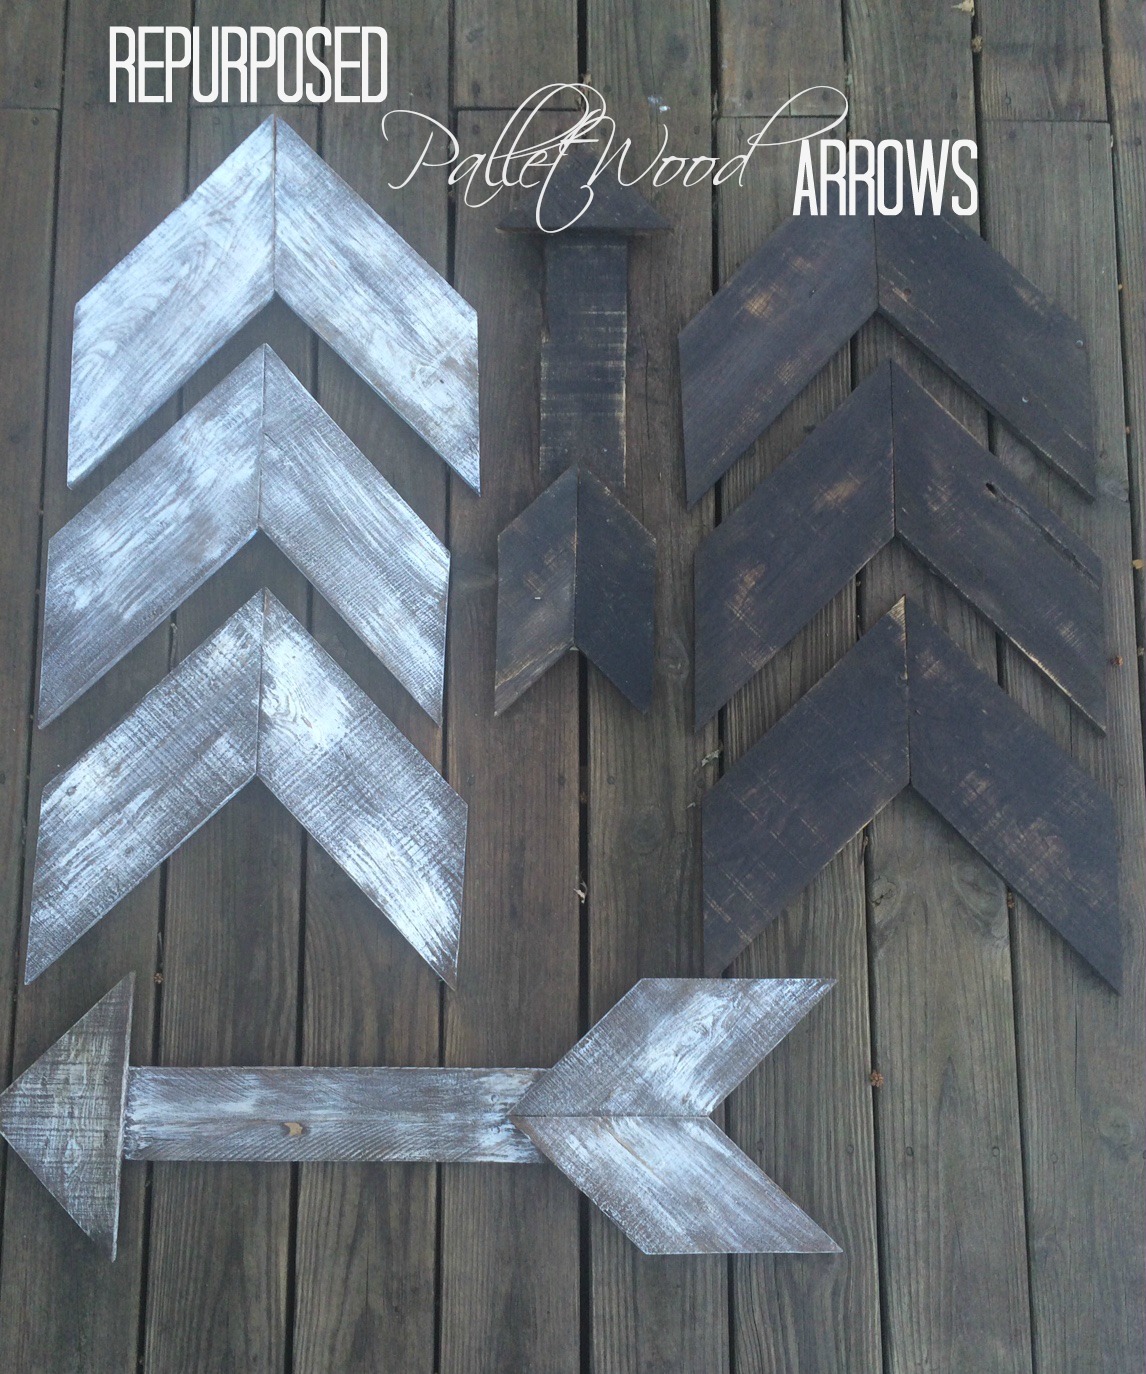 Favorite DIY woodworking project ideas to do this weekend to organize and decorate your home. Great for beginner and intermediate woodworkers and DIYers.